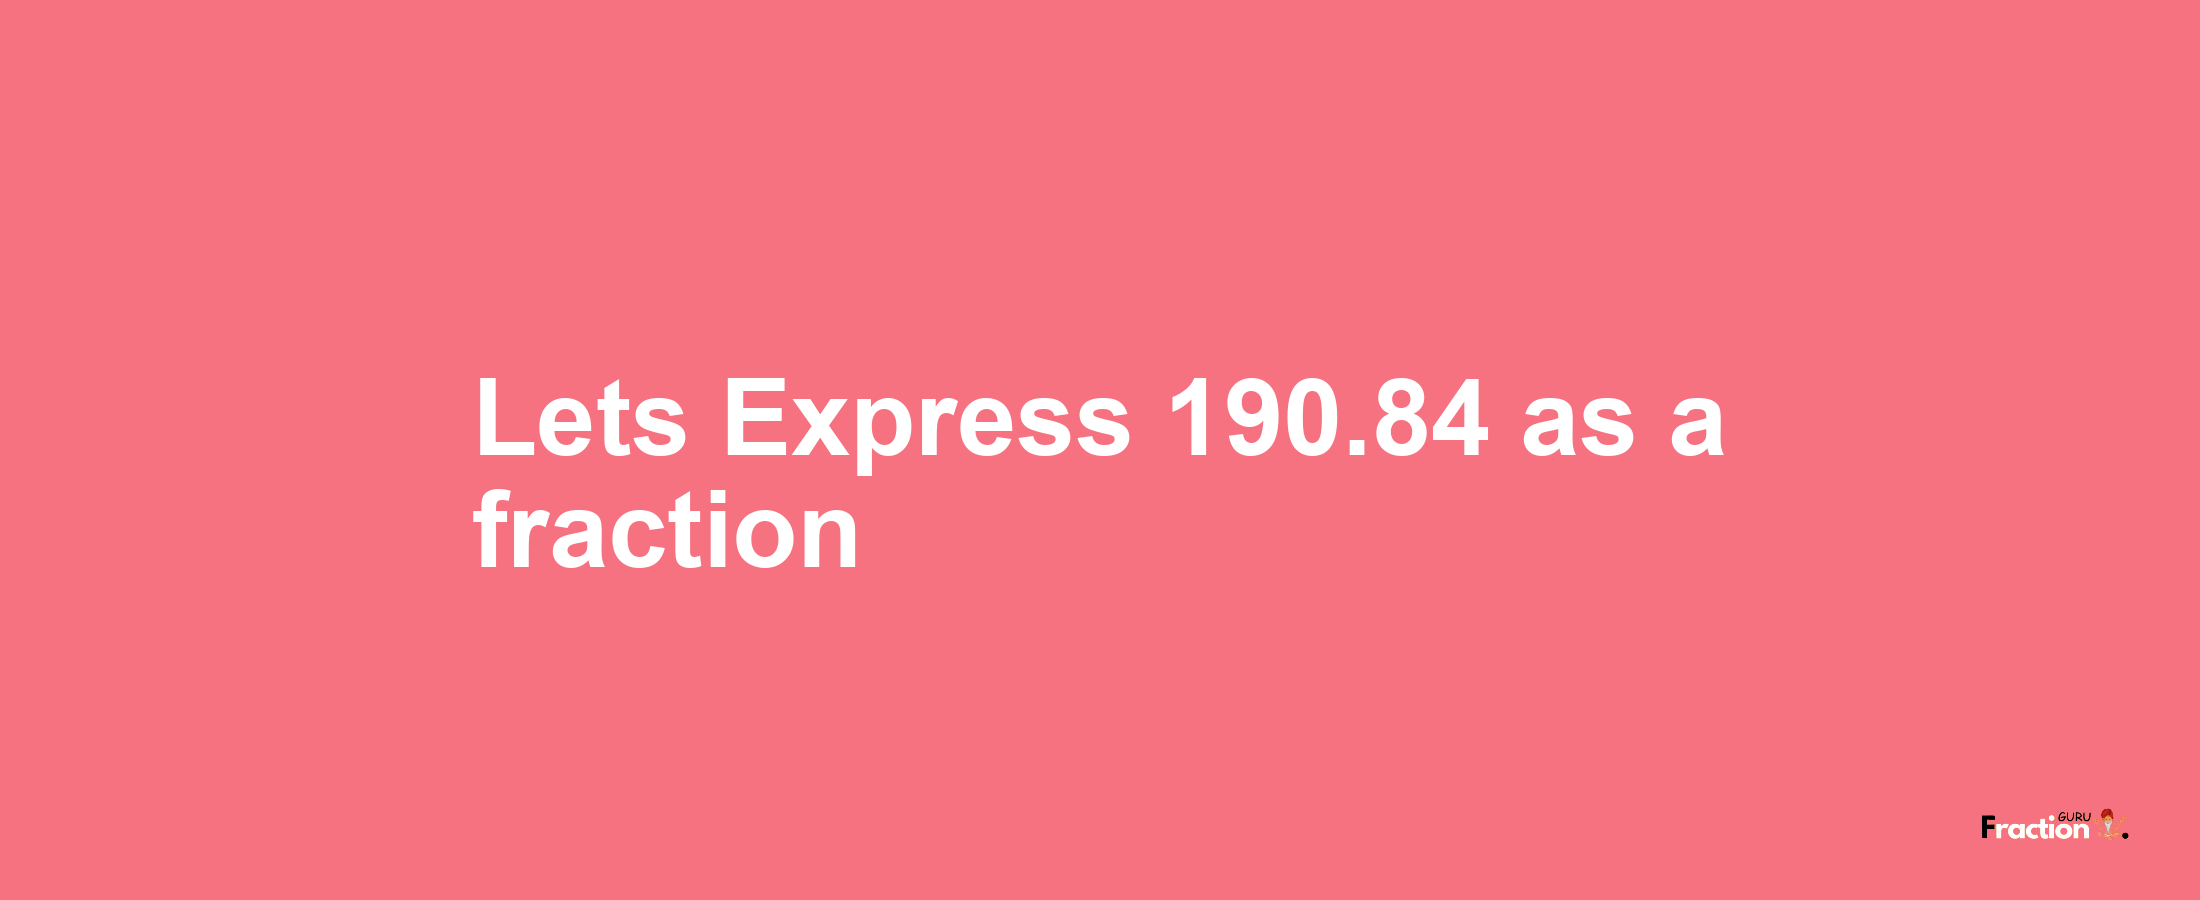 Lets Express 190.84 as afraction